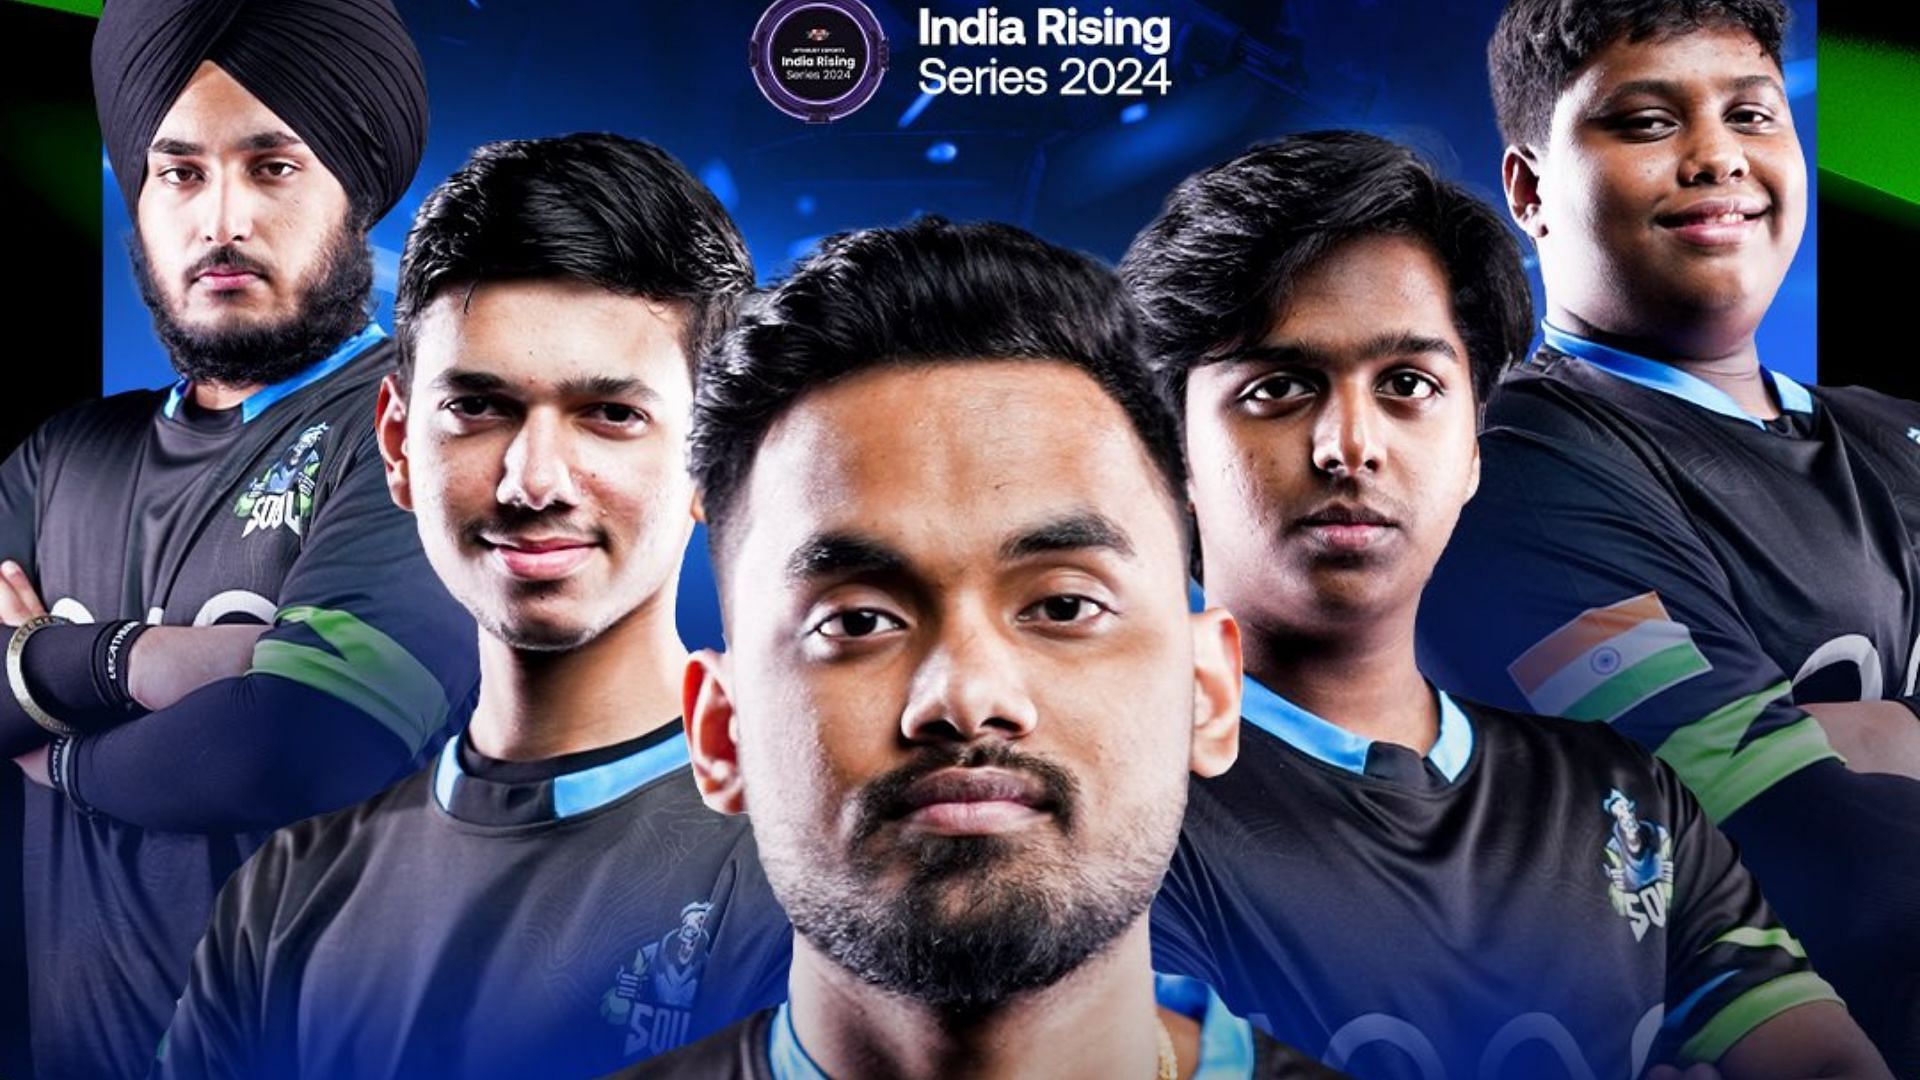 Team Soul emerged victorious in Upthrust BGMI India Rising 2024 (Image via S8UL Esports)